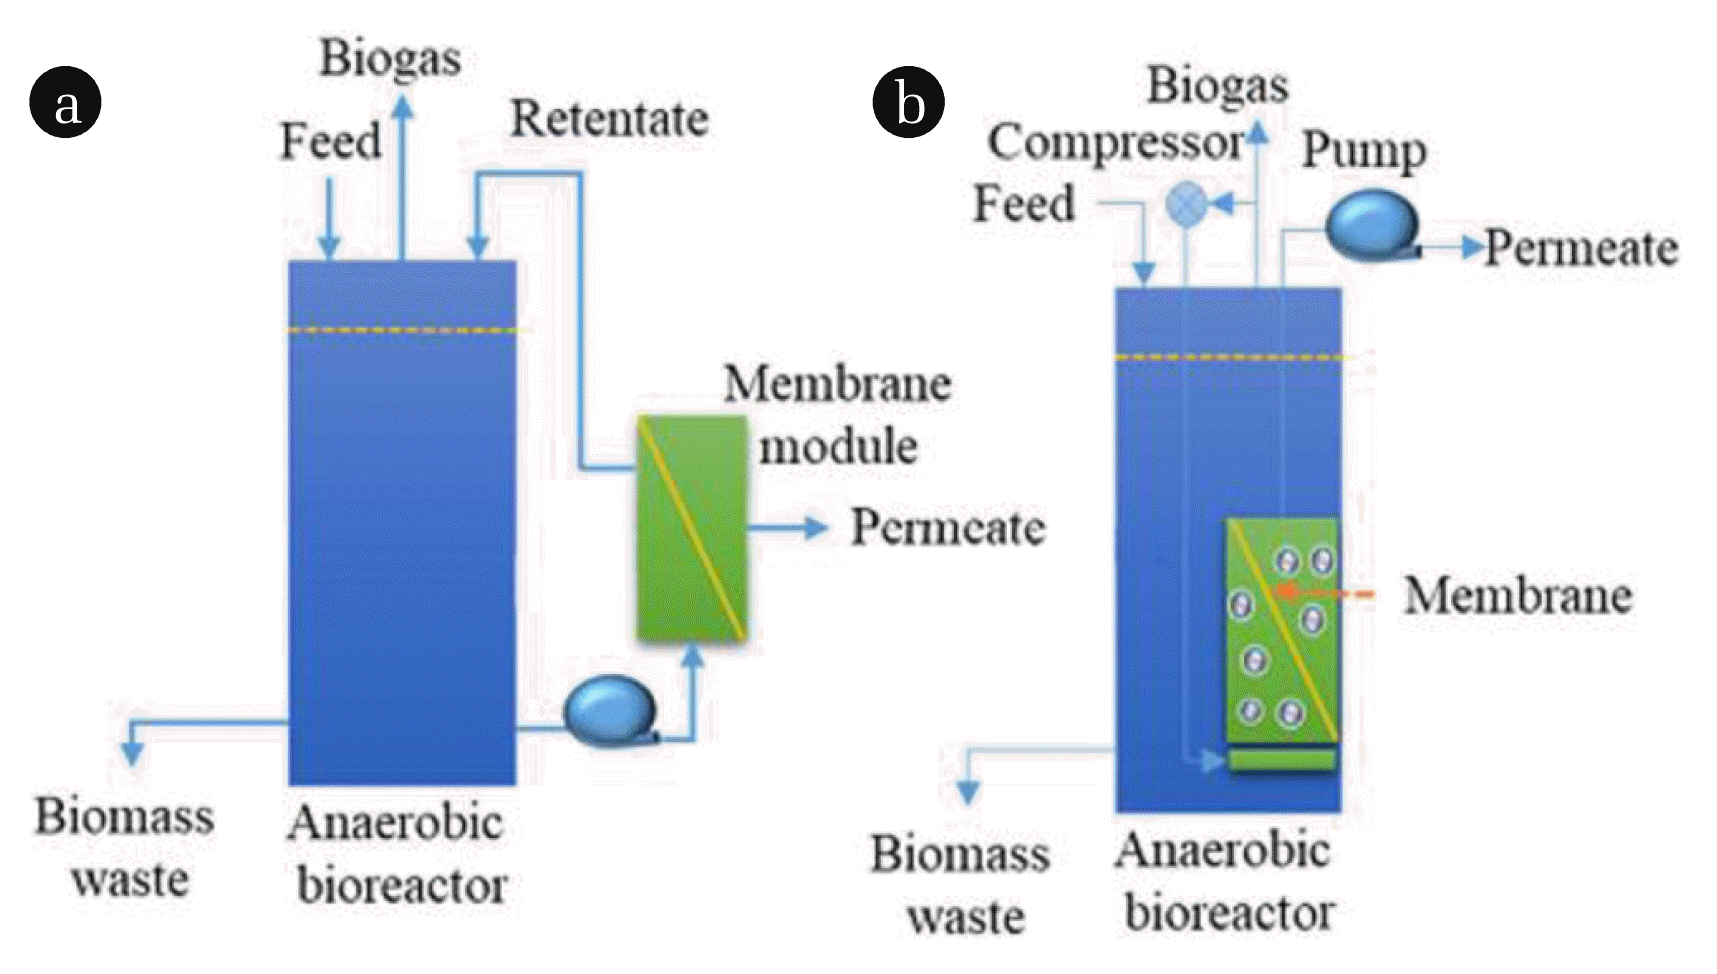 7. Ultrasound for membrane fouling control in wastewater treatment